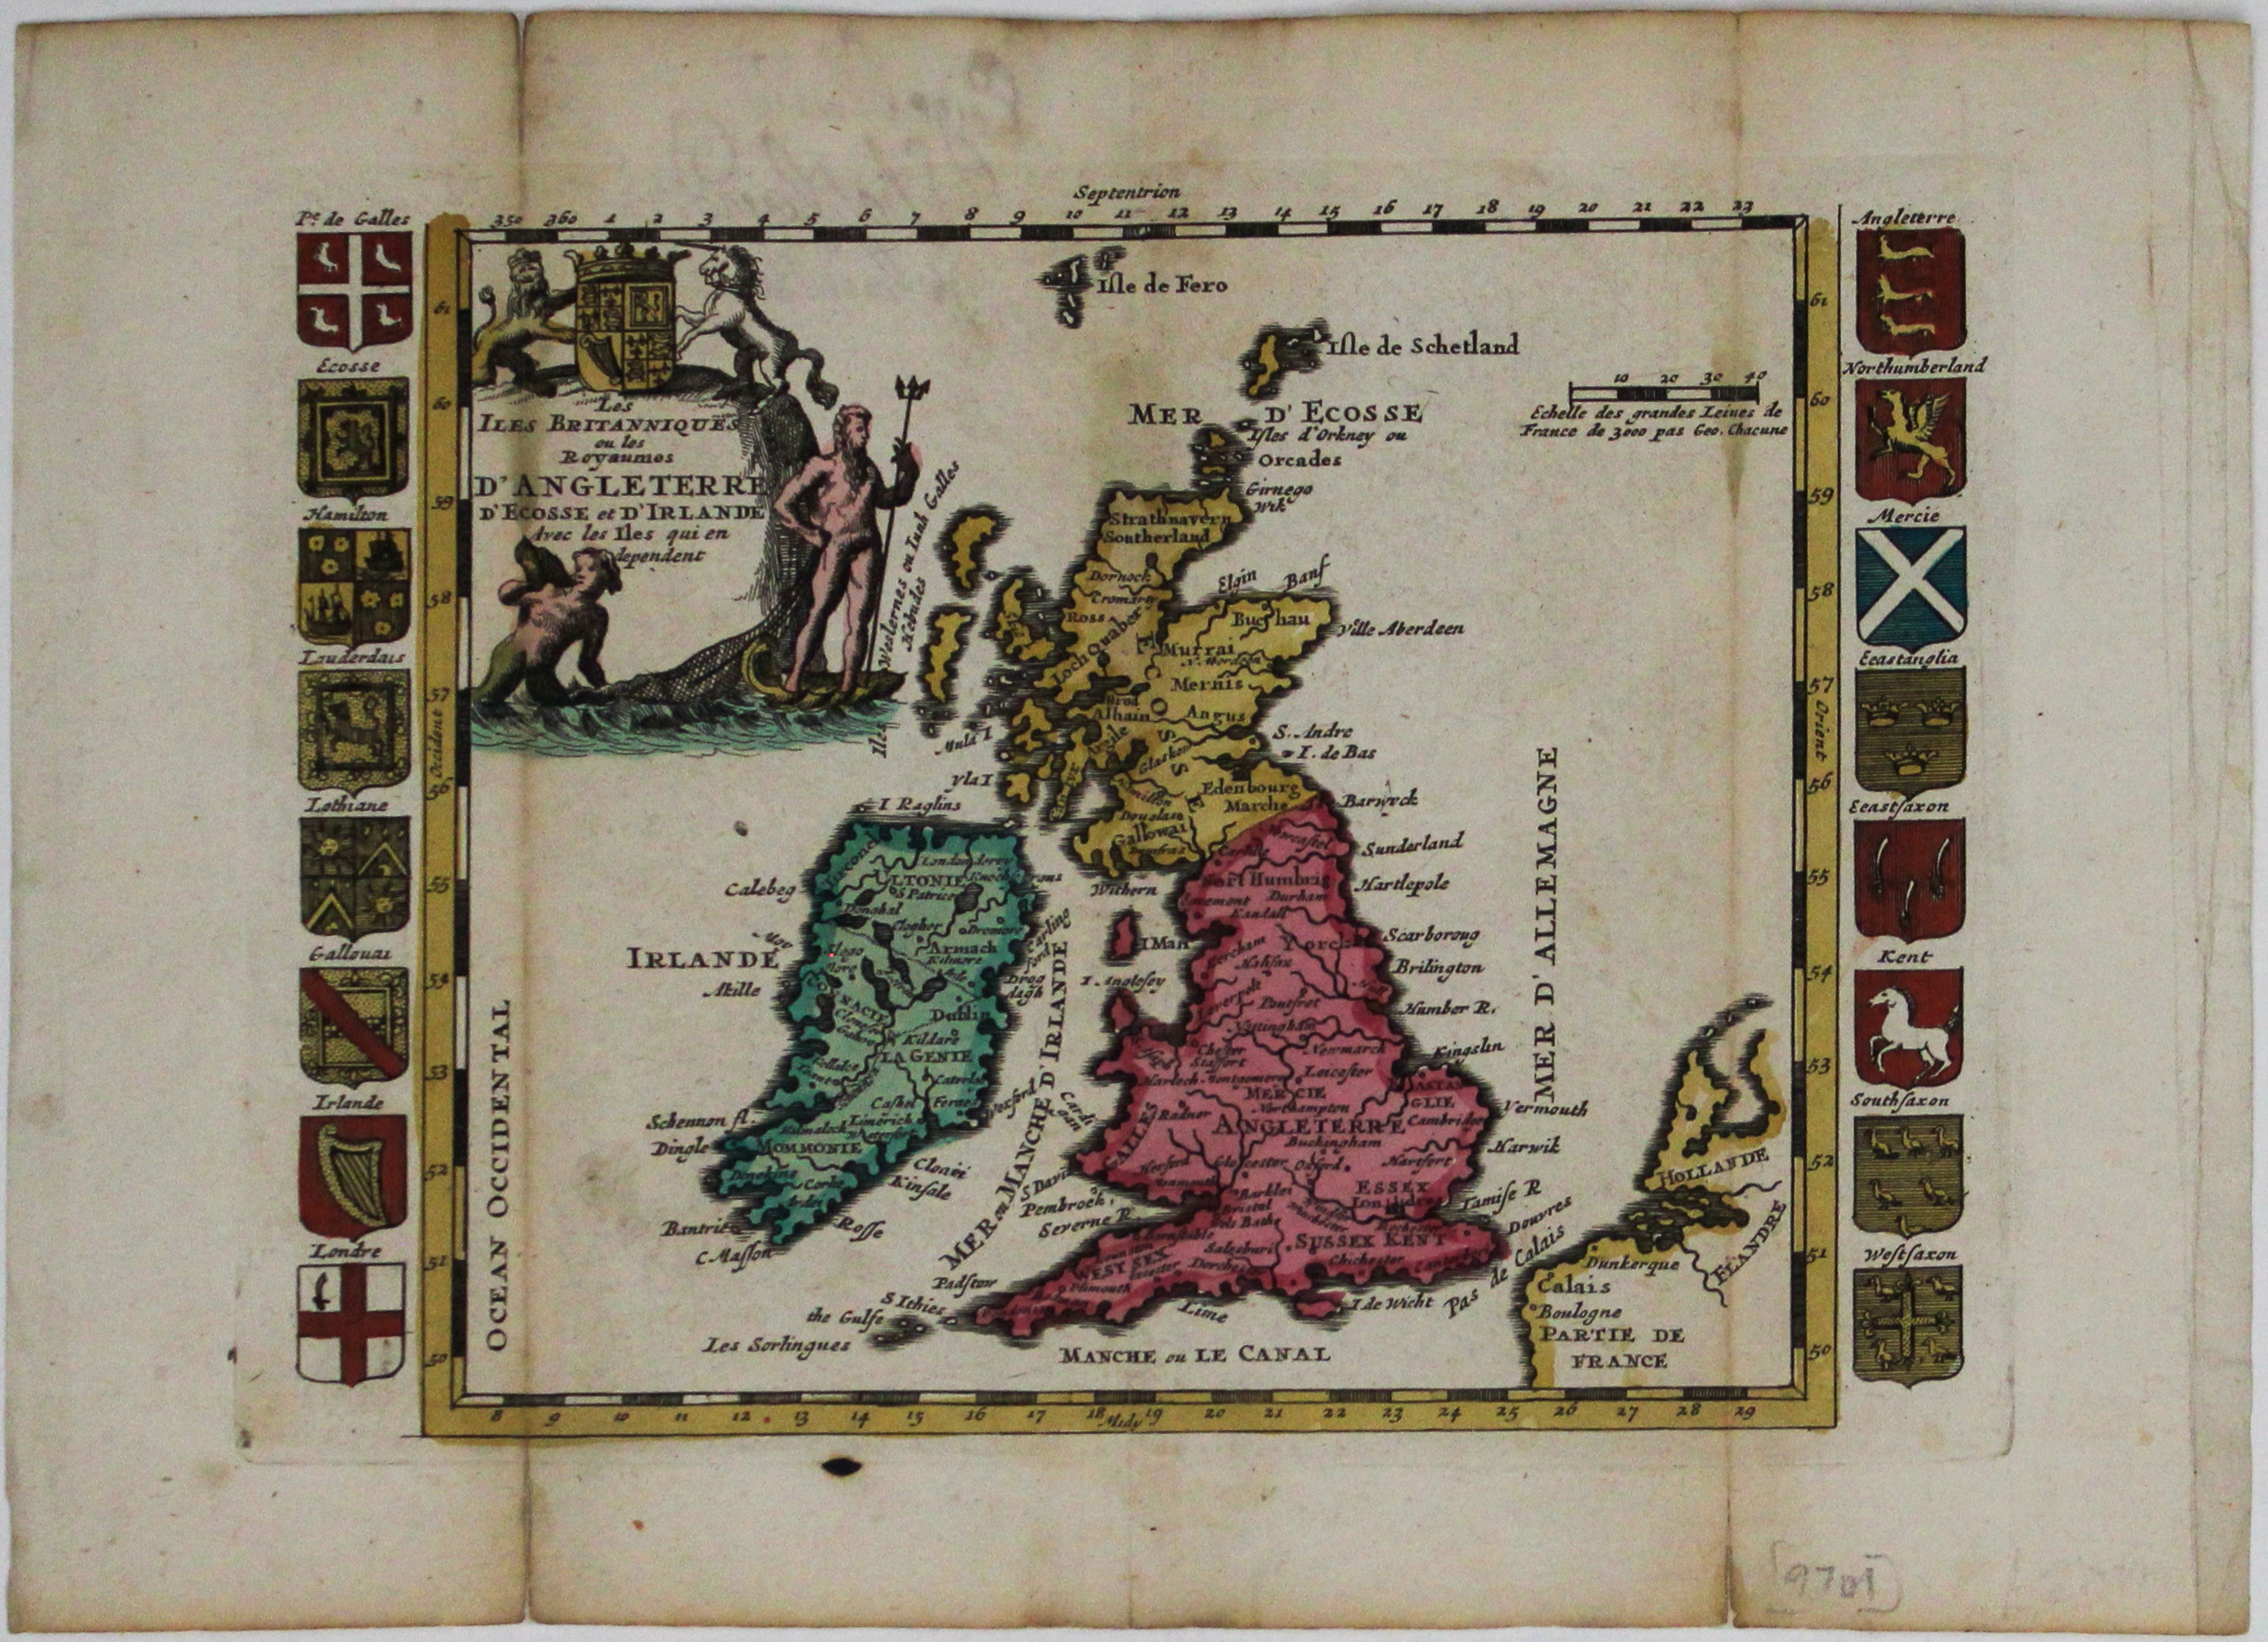 La Feuille's Map of the British Isles